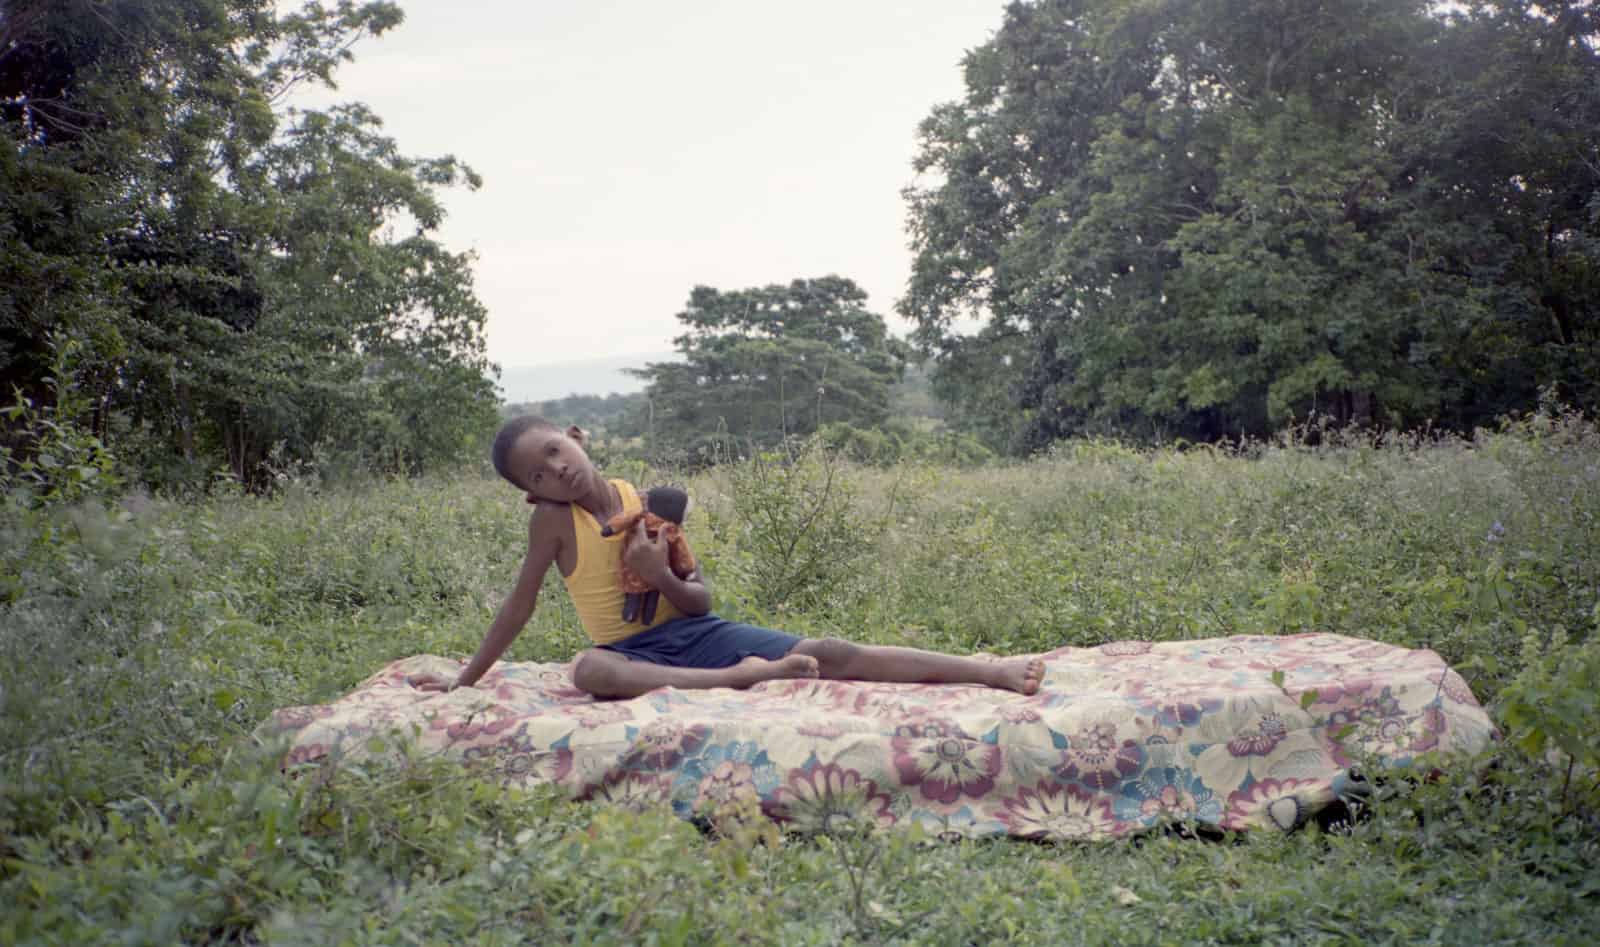 film still of a field of wildflowers, a child holding a doll.